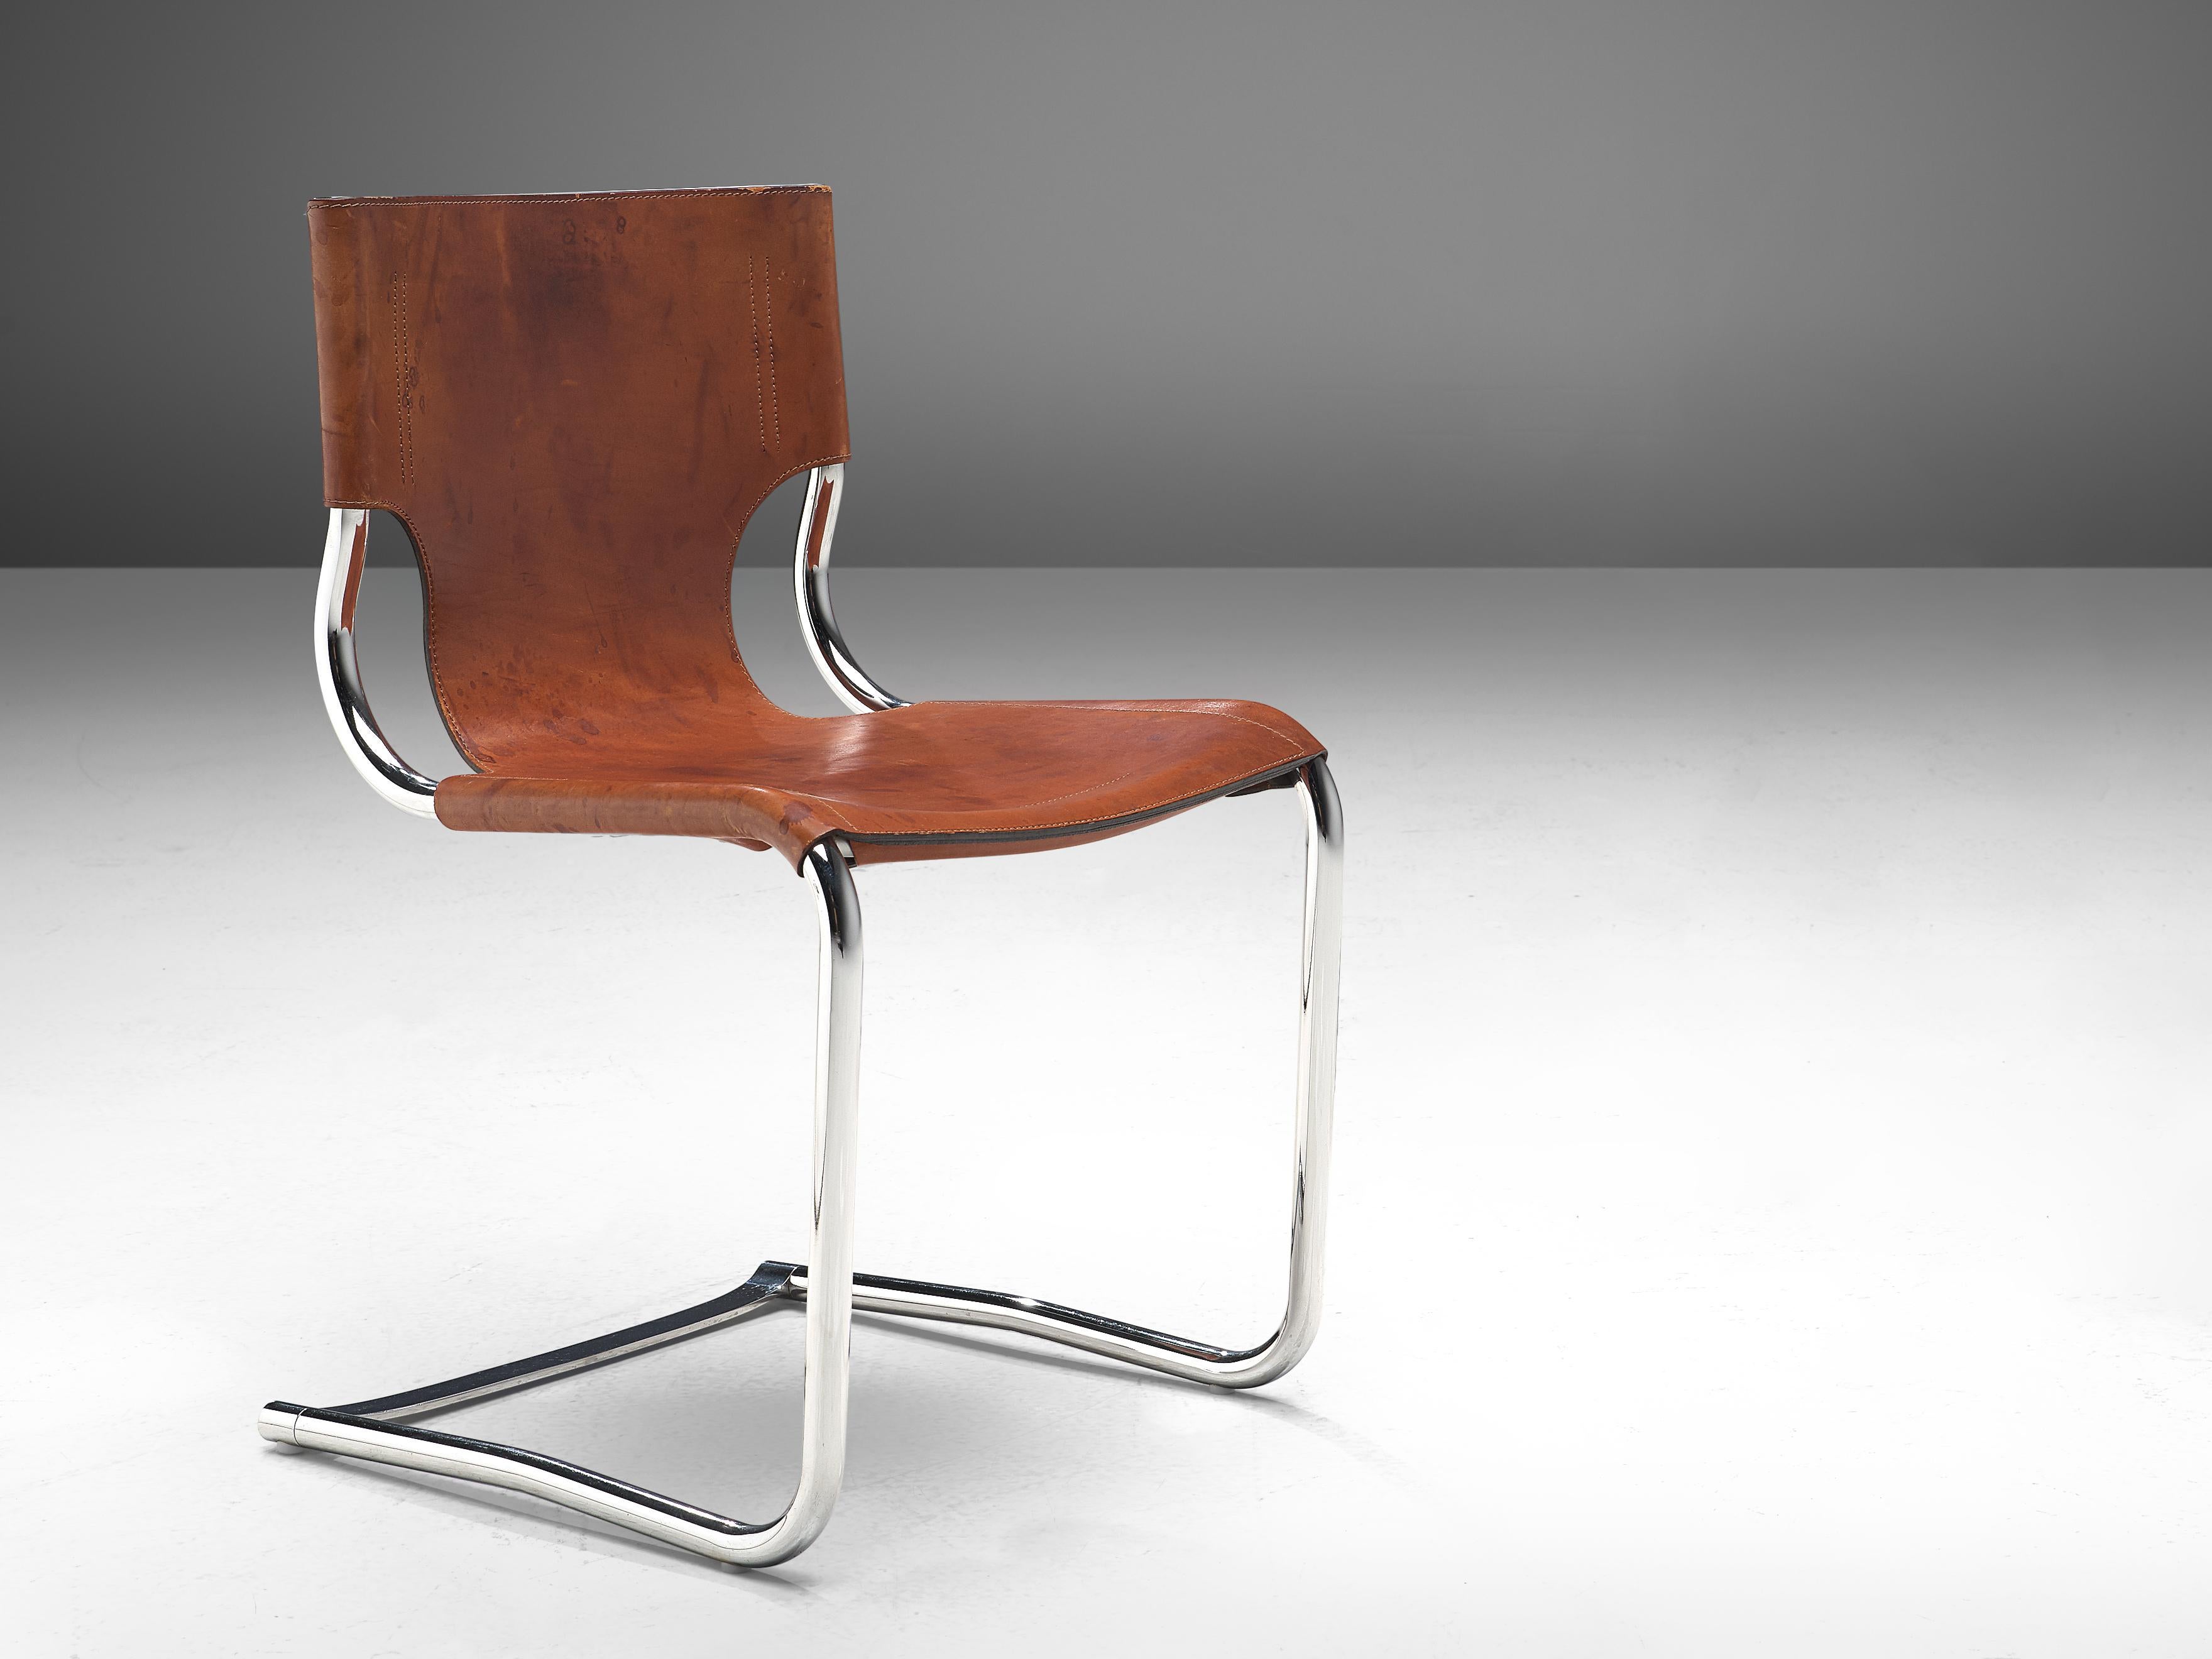 Carlo Bartoli, '920' chair, cognac leather and steel, Italy, 1971.

This elegant chair is designed by Carlo Bartoli in 1971. The design features a cantilevered tubular frame chairs are executed with the finest black leather that is used as a shell